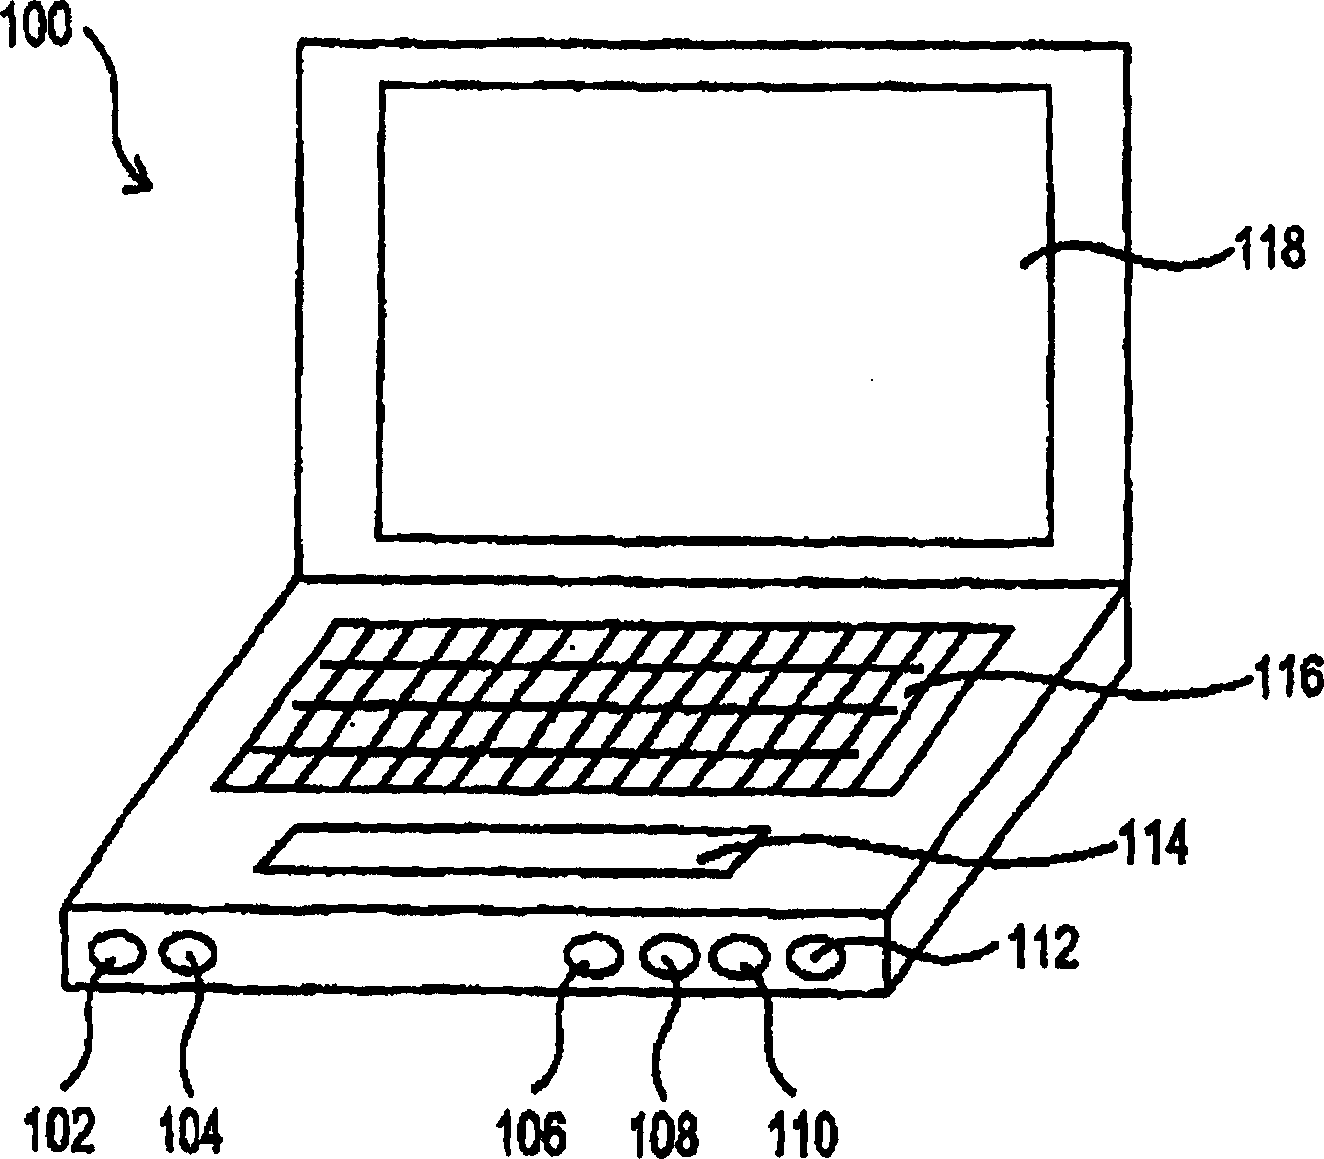 Personal computer integrated with personal digital assistant